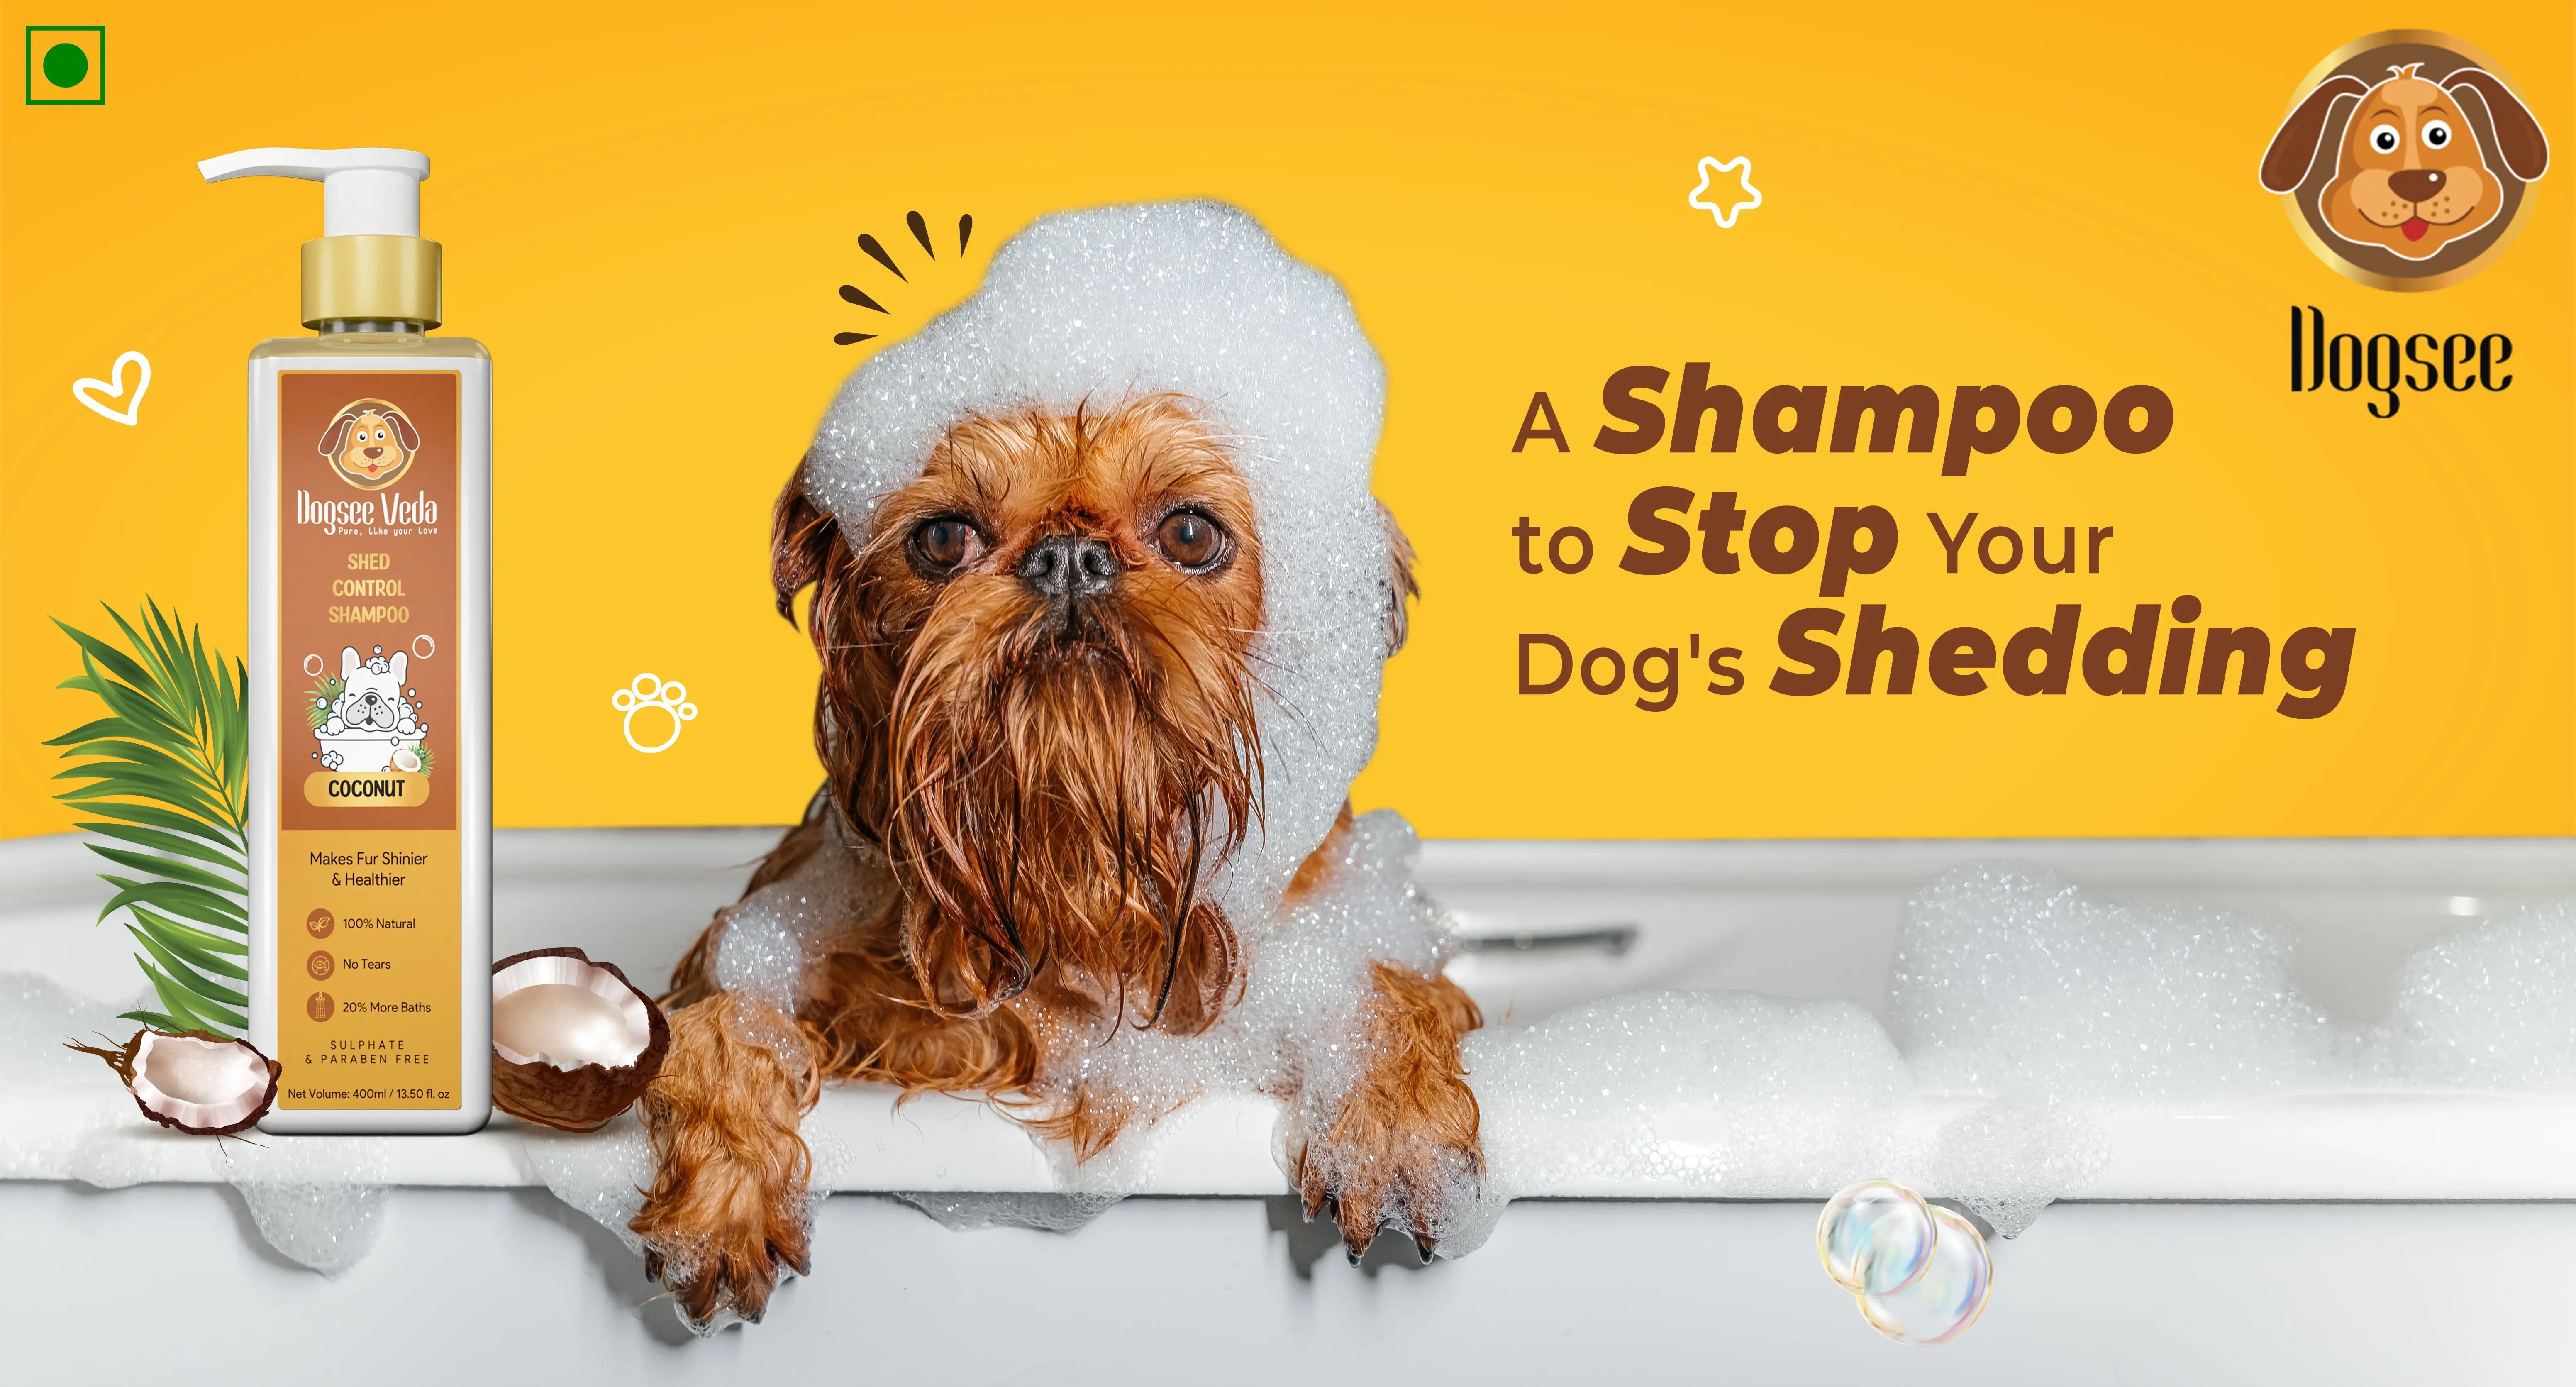 A Shampoo to Stop Your Dog's Shedding